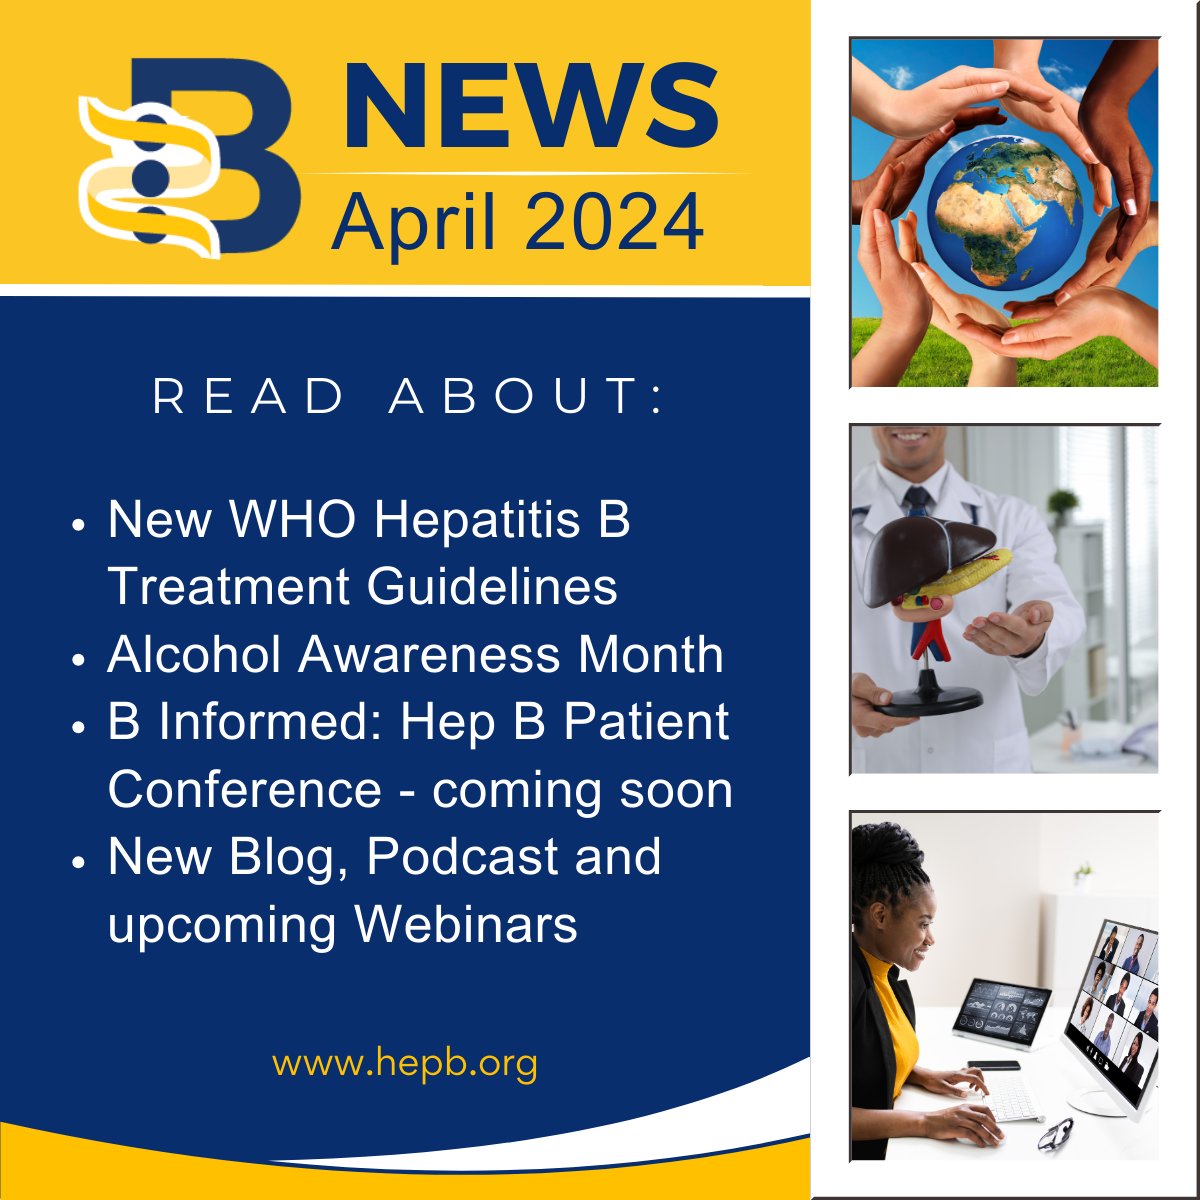 Check out the latest B-NEWS (April 2024 Edition) here ➡️ow.ly/njnO50Ril1r and learn how to connect with the Hepatitis B Foundation! Subscribe to our newsletter 📰 ow.ly/k3Hg50Ril1q #HepatitisB #AlcoholAwarenessMonth ❣️